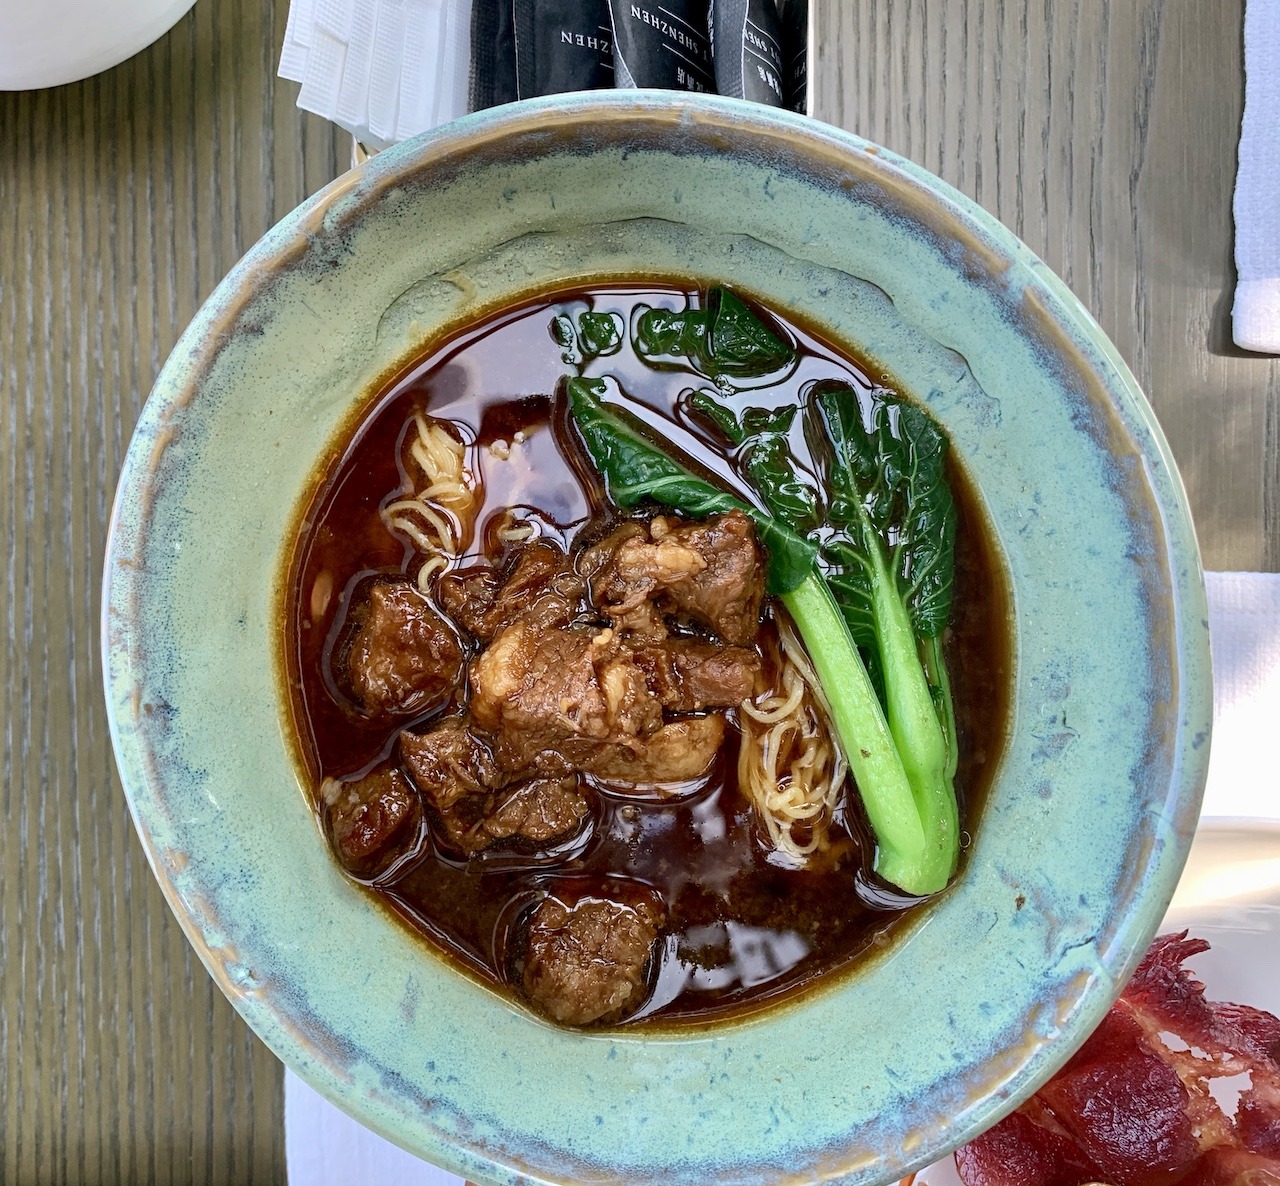 Beef Nooldle soup with chili oil